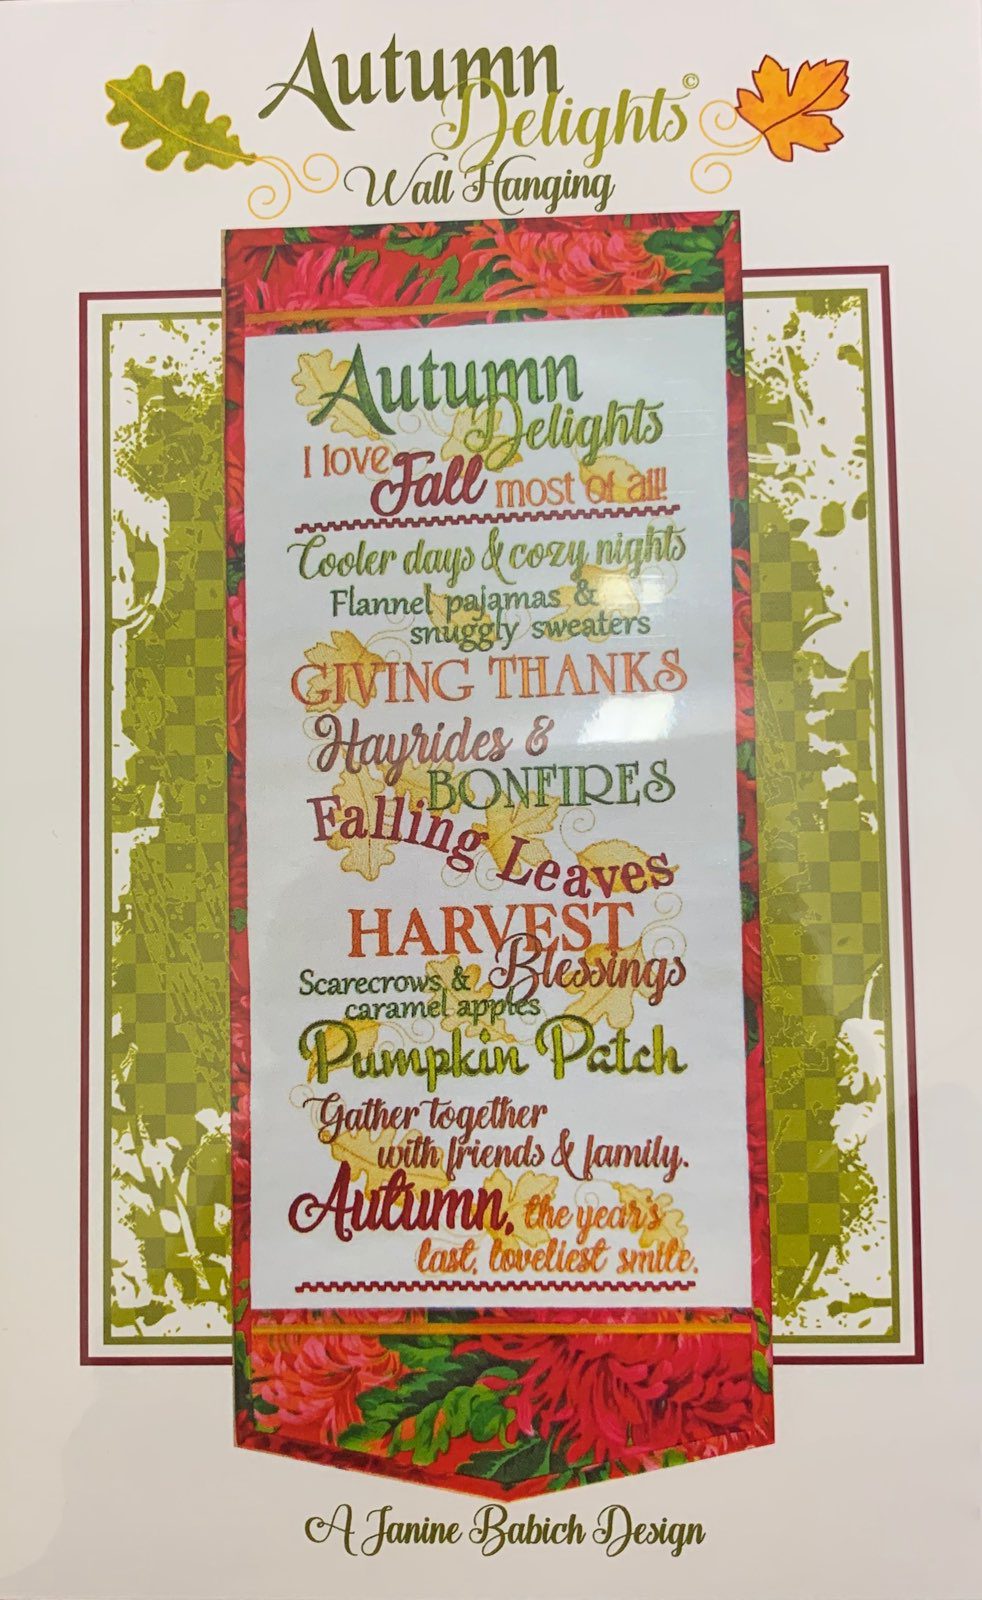 Janine Babich Designs -Autumn Delights Wall Hanging ME CD